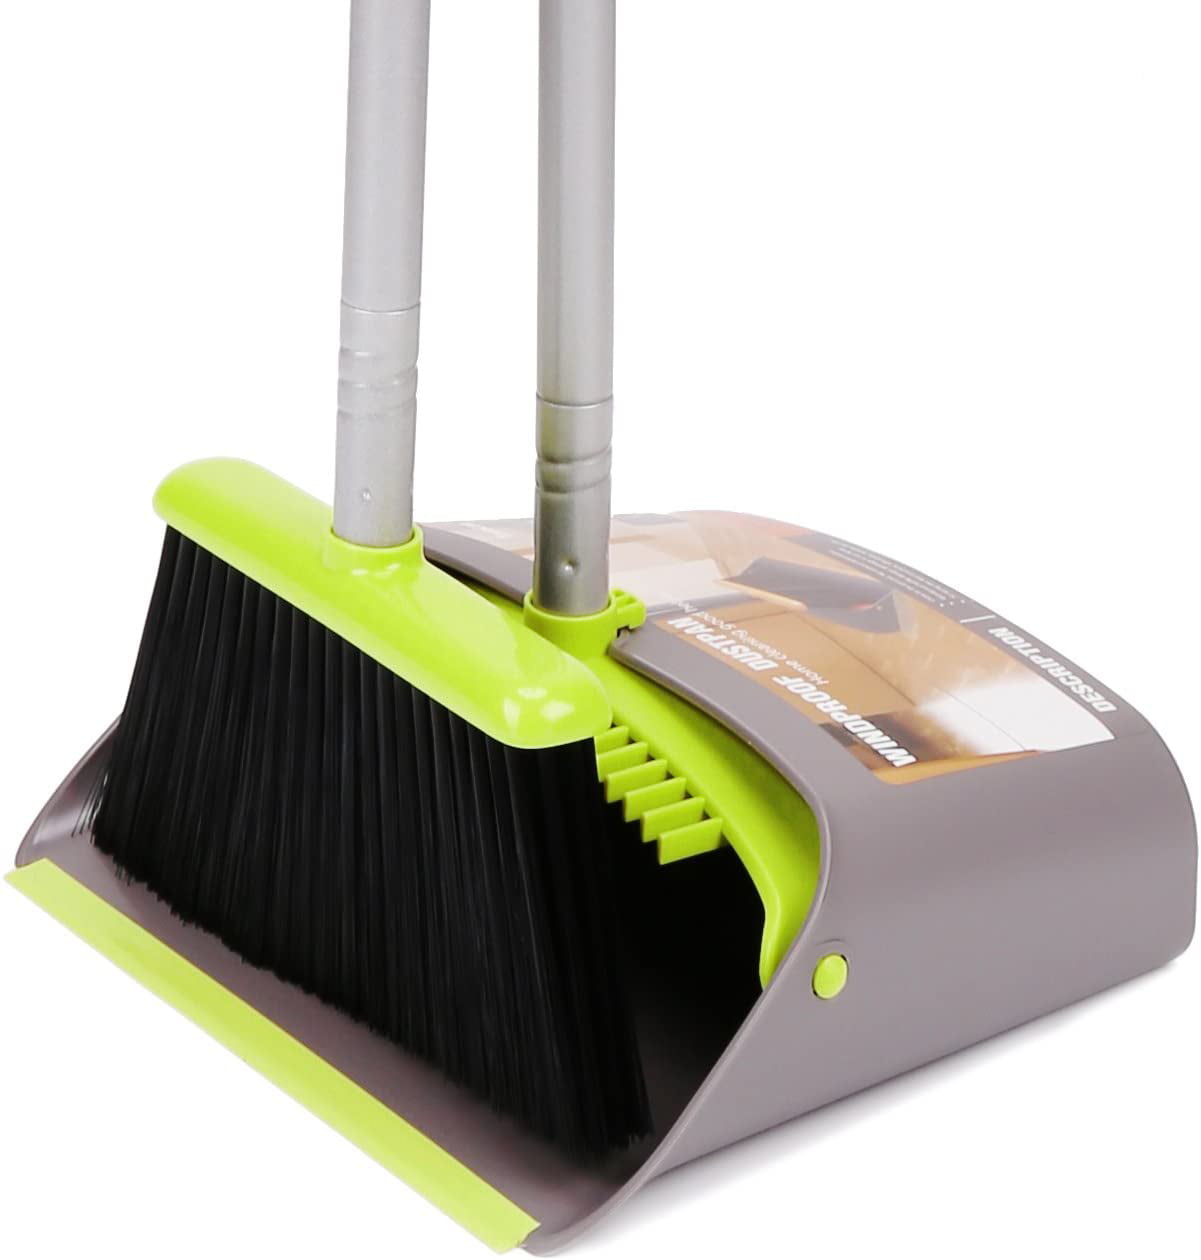 Broom and Dustpan Set Broom and Upright Dustpan with Long Handle Creamy-White Broom with Dustpan Combo Set for Home Office Kitchen Lobby Floor Indoor Sweeping Cleaning Use